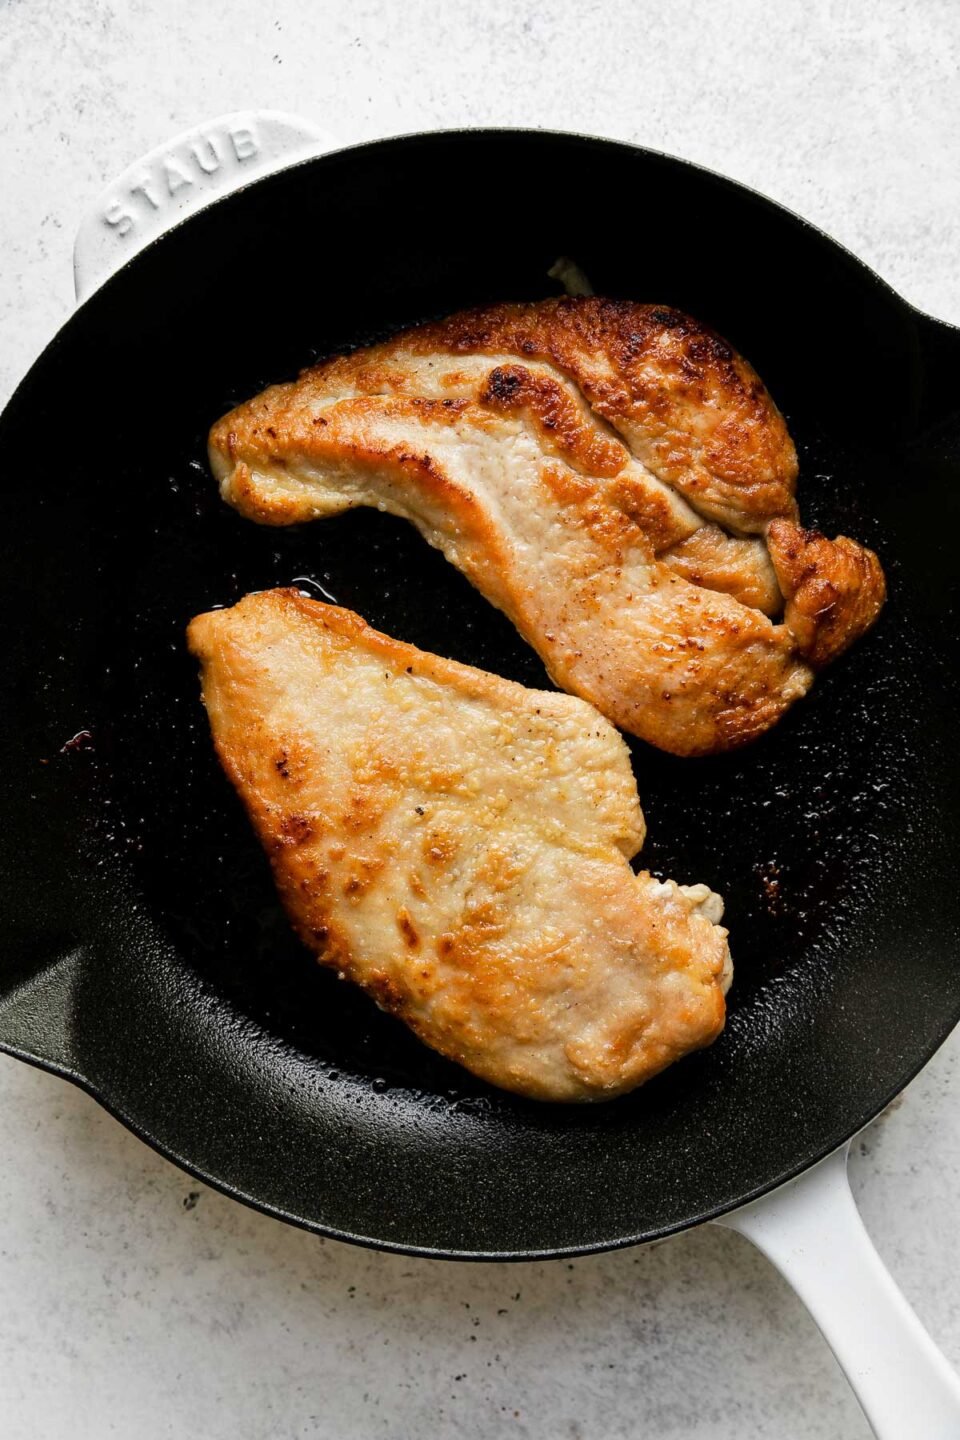 How to make Meyer Lemon Chicken Piccata, step 4: Brown the chicken. Two browned chicken cutlets sit in a white Staub cast iron skillet. The skillet sits atop a creamy white textured surface.